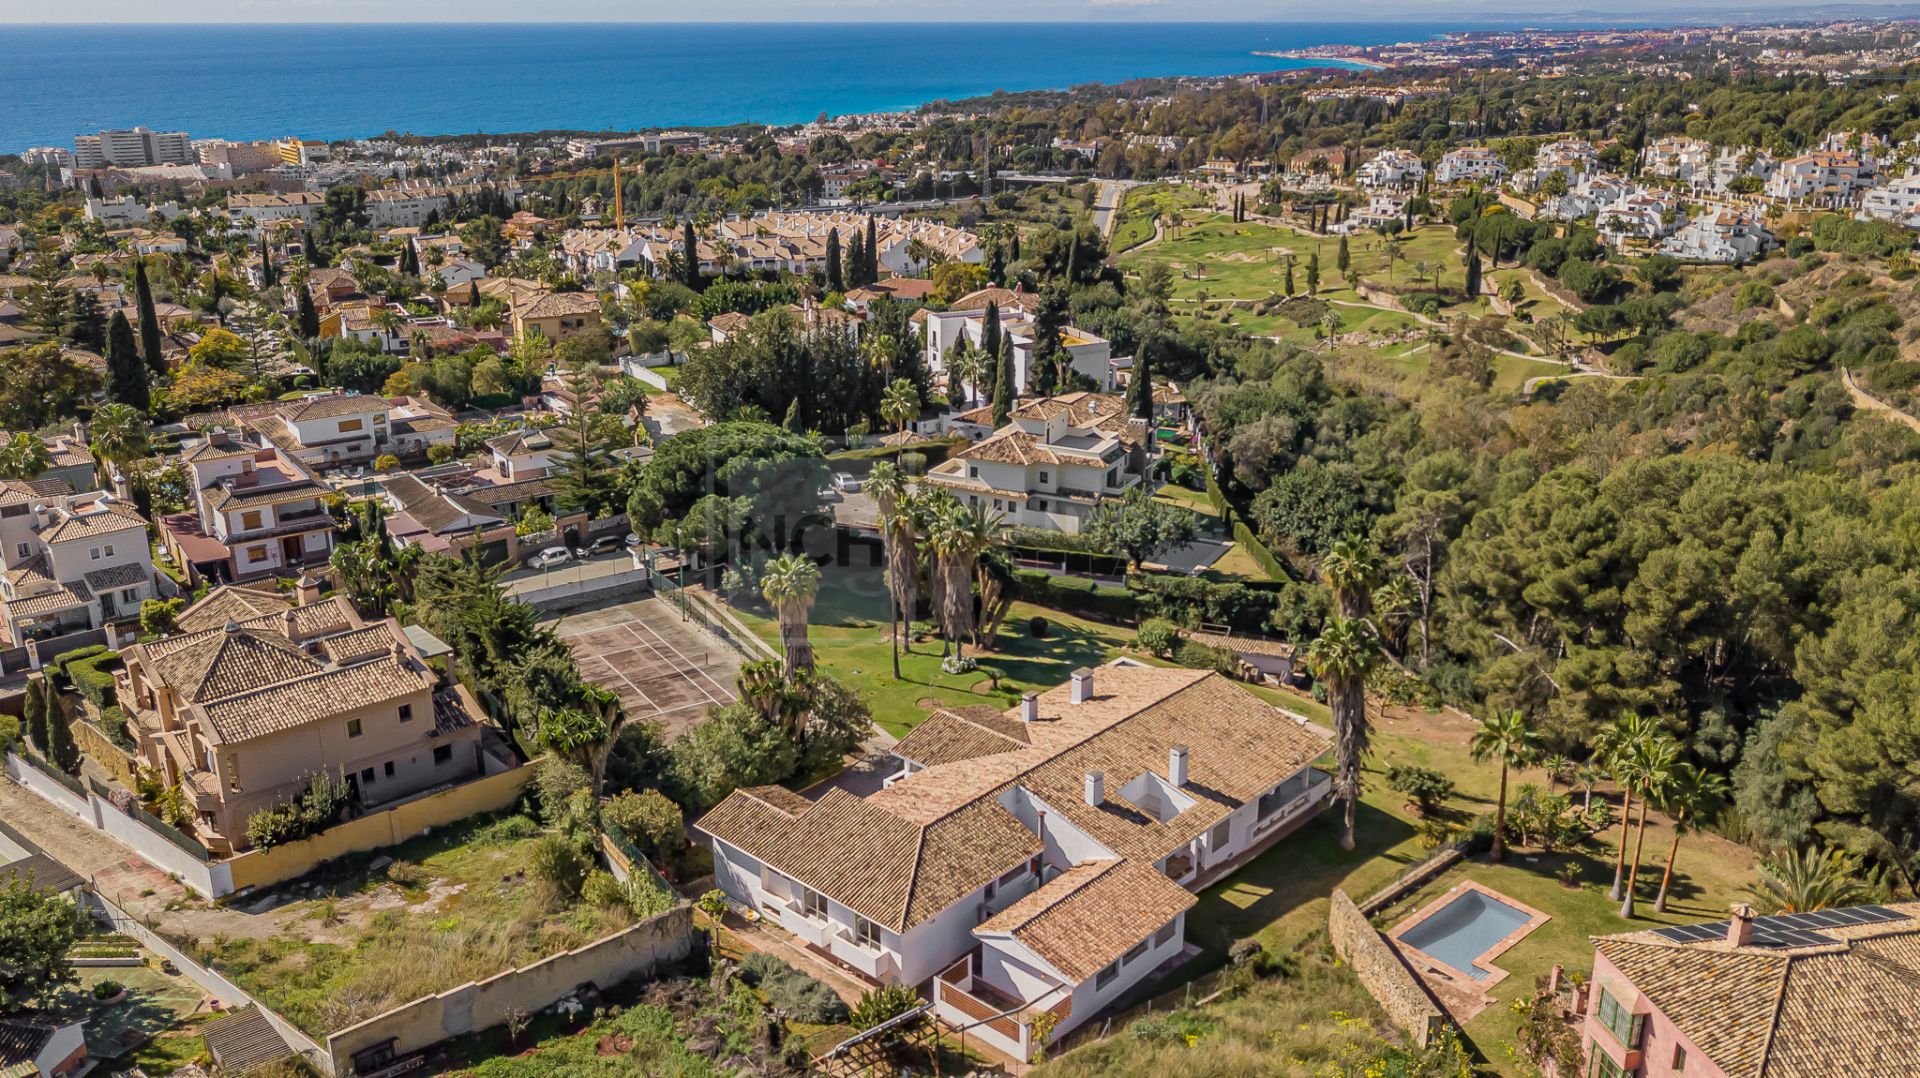 EXCELLENT INVESTMENT PROPERTY 7-BEDROOM PROPERTY ABOVE MARBELLA CENTRE